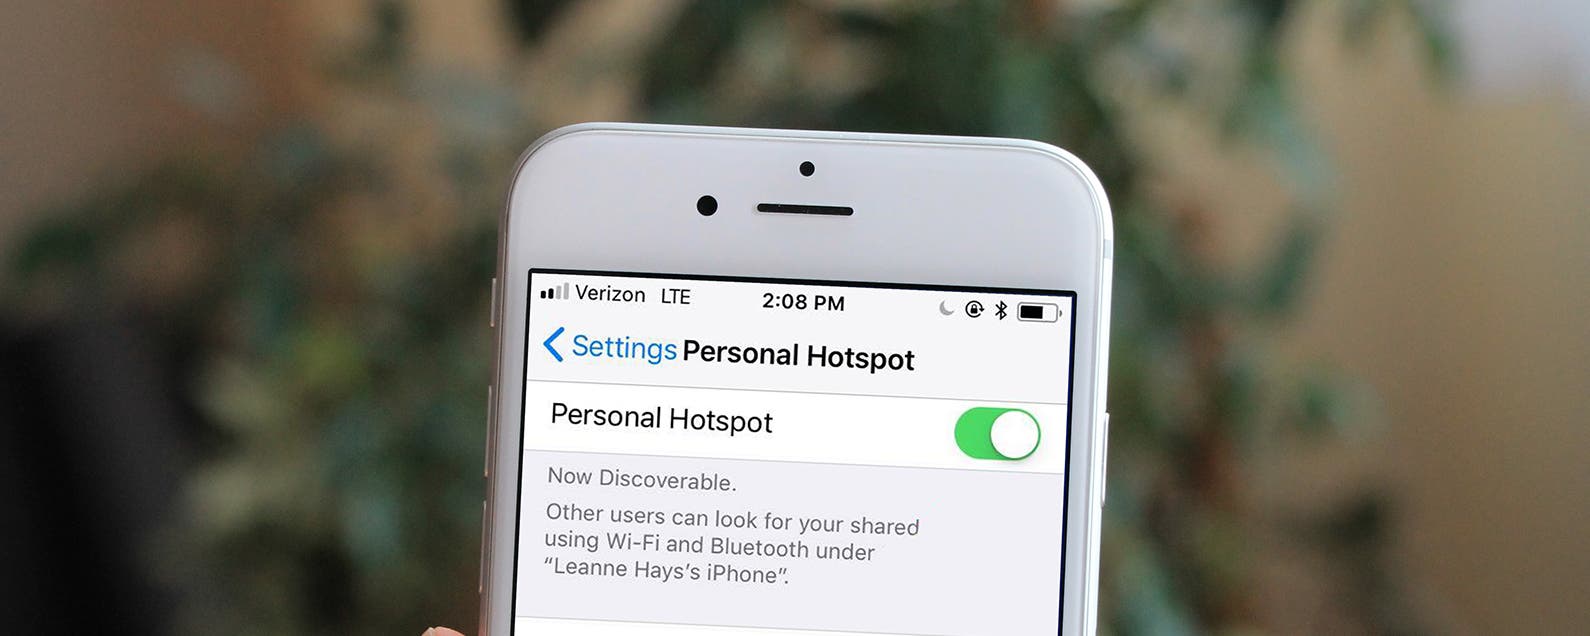 How to Connect to a Personal Wi-Fi Hotspot Using Bluetooth